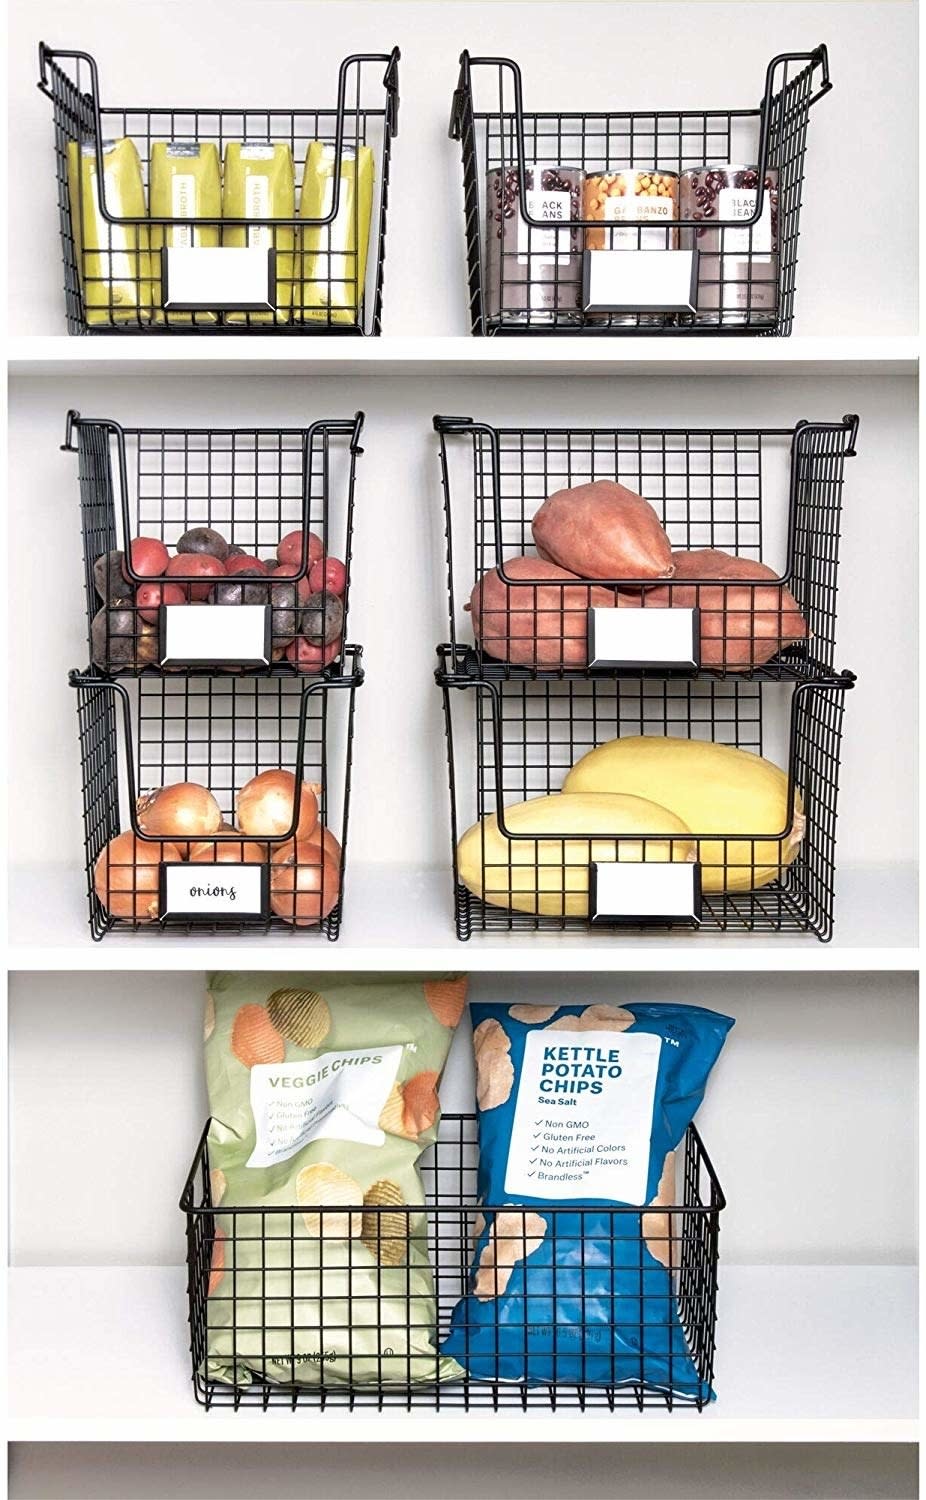 Make your pantry look picture-perfect and know exactly where your cans of black beans are. <br /><br /><strong>Promising review:</strong> "I love these baskets. They have lots of space and look great in my pantry." &mdash; <a href="https://www.amazon.com/gp/customer-reviews/RWU5IRAPIOINU?&amp;linkCode=ll2&amp;tag=huffpost-bfsyndication-20&amp;linkId=63dcd7da36002981b5207aa48be0d445&amp;language=en_US&amp;ref_=as_li_ss_tl" target="_blank" rel="nofollow noopener noreferrer" data-skimlinks-tracking="5854435" data-vars-affiliate="Amazon" data-vars-href="https://www.amazon.com/gp/customer-reviews/RWU5IRAPIOINU?tag=bfmal-20&amp;ascsubtag=5854435%2C21%2C37%2Cmobile_web%2C0%2C0%2C16324224" data-vars-keywords="cleaning,fast fashion" data-vars-link-id="16324224" data-vars-price="" data-vars-product-id="20942028" data-vars-product-img="" data-vars-product-title="" data-vars-retailers="Amazon">Yesenia<br /><br /></a><strong>Get it from Amazon for <a href="https://www.amazon.com/iDesign-Classico-Stackable-Countertop-Organization/dp/B07MVX8C9J?&amp;linkCode=ll1&amp;tag=huffpost-bfsyndication-20&amp;linkId=bc040d1f0fa64ec1db1b09e4bfc82ef2&amp;language=en_US&amp;ref_=as_li_ss_tl" target="_blank" rel="nofollow noopener noreferrer" data-skimlinks-tracking="5854435" data-vars-affiliate="Amazon" data-vars-asin="B07Q7D67WZ" data-vars-href="https://www.amazon.com/dp/B07Q7D67WZ?tag=bfmal-20&amp;ascsubtag=5854435%2C21%2C37%2Cmobile_web%2C0%2C0%2C16324336" data-vars-keywords="cleaning,fast fashion" data-vars-link-id="16324336" data-vars-price="" data-vars-product-id="18668647" data-vars-product-img="https://m.media-amazon.com/images/I/51z1-9G3eCL.jpg" data-vars-product-title="iDesign Classico Storage Basket with Handles for Pantry, Kitchen, Bathroom, Countertop, and Desk Organization, Stackable - Medium" data-vars-retailers="Amazon">$17.66+</a> (available in two sizes).</strong>